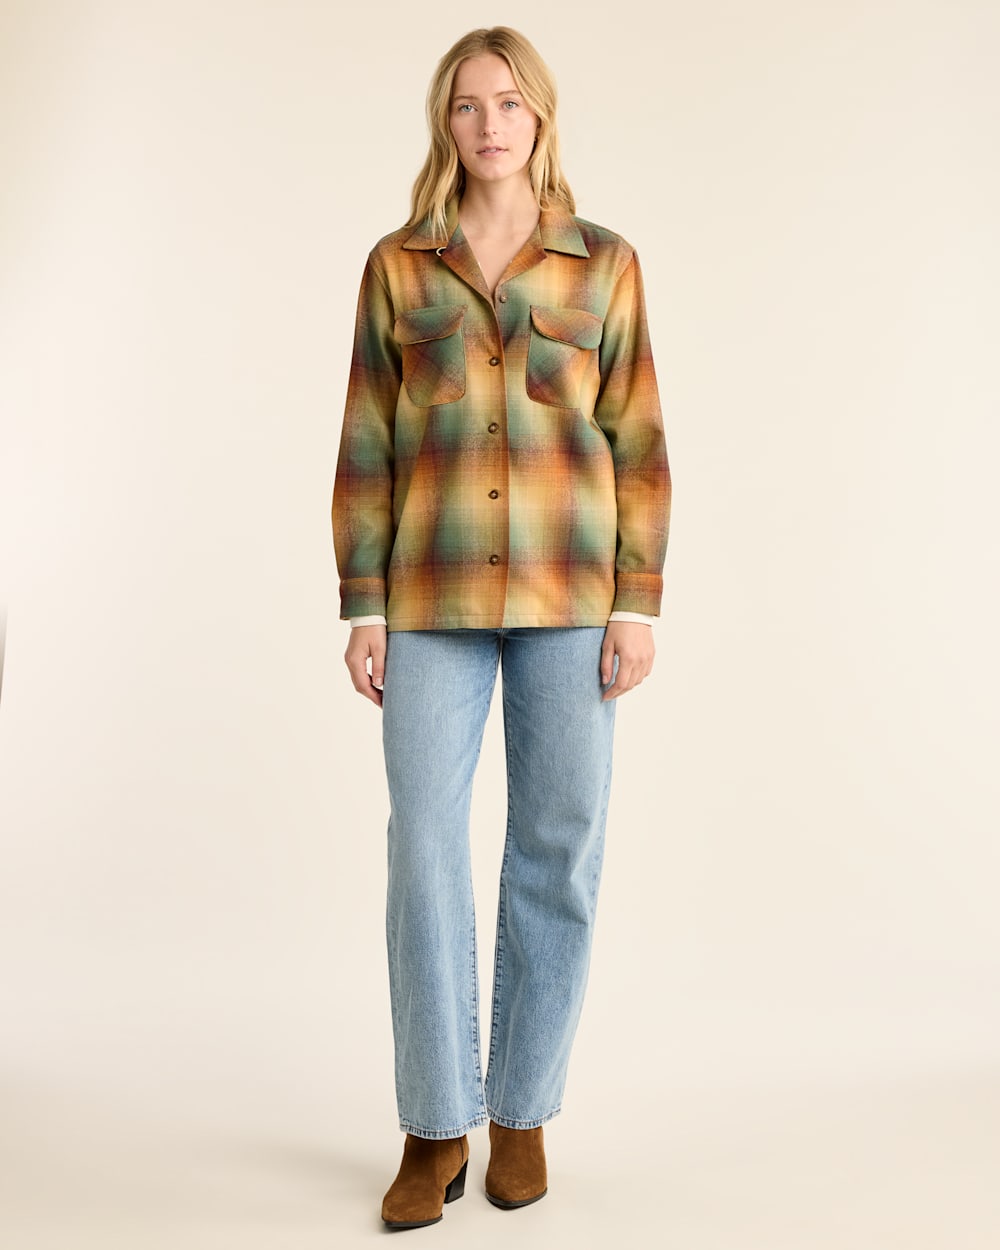 ALTERNATE VIEW OF WOMEN'S PLAID BOYFRIEND BOARD SHIRT IN GOLD/GREEN OMBRE image number 5